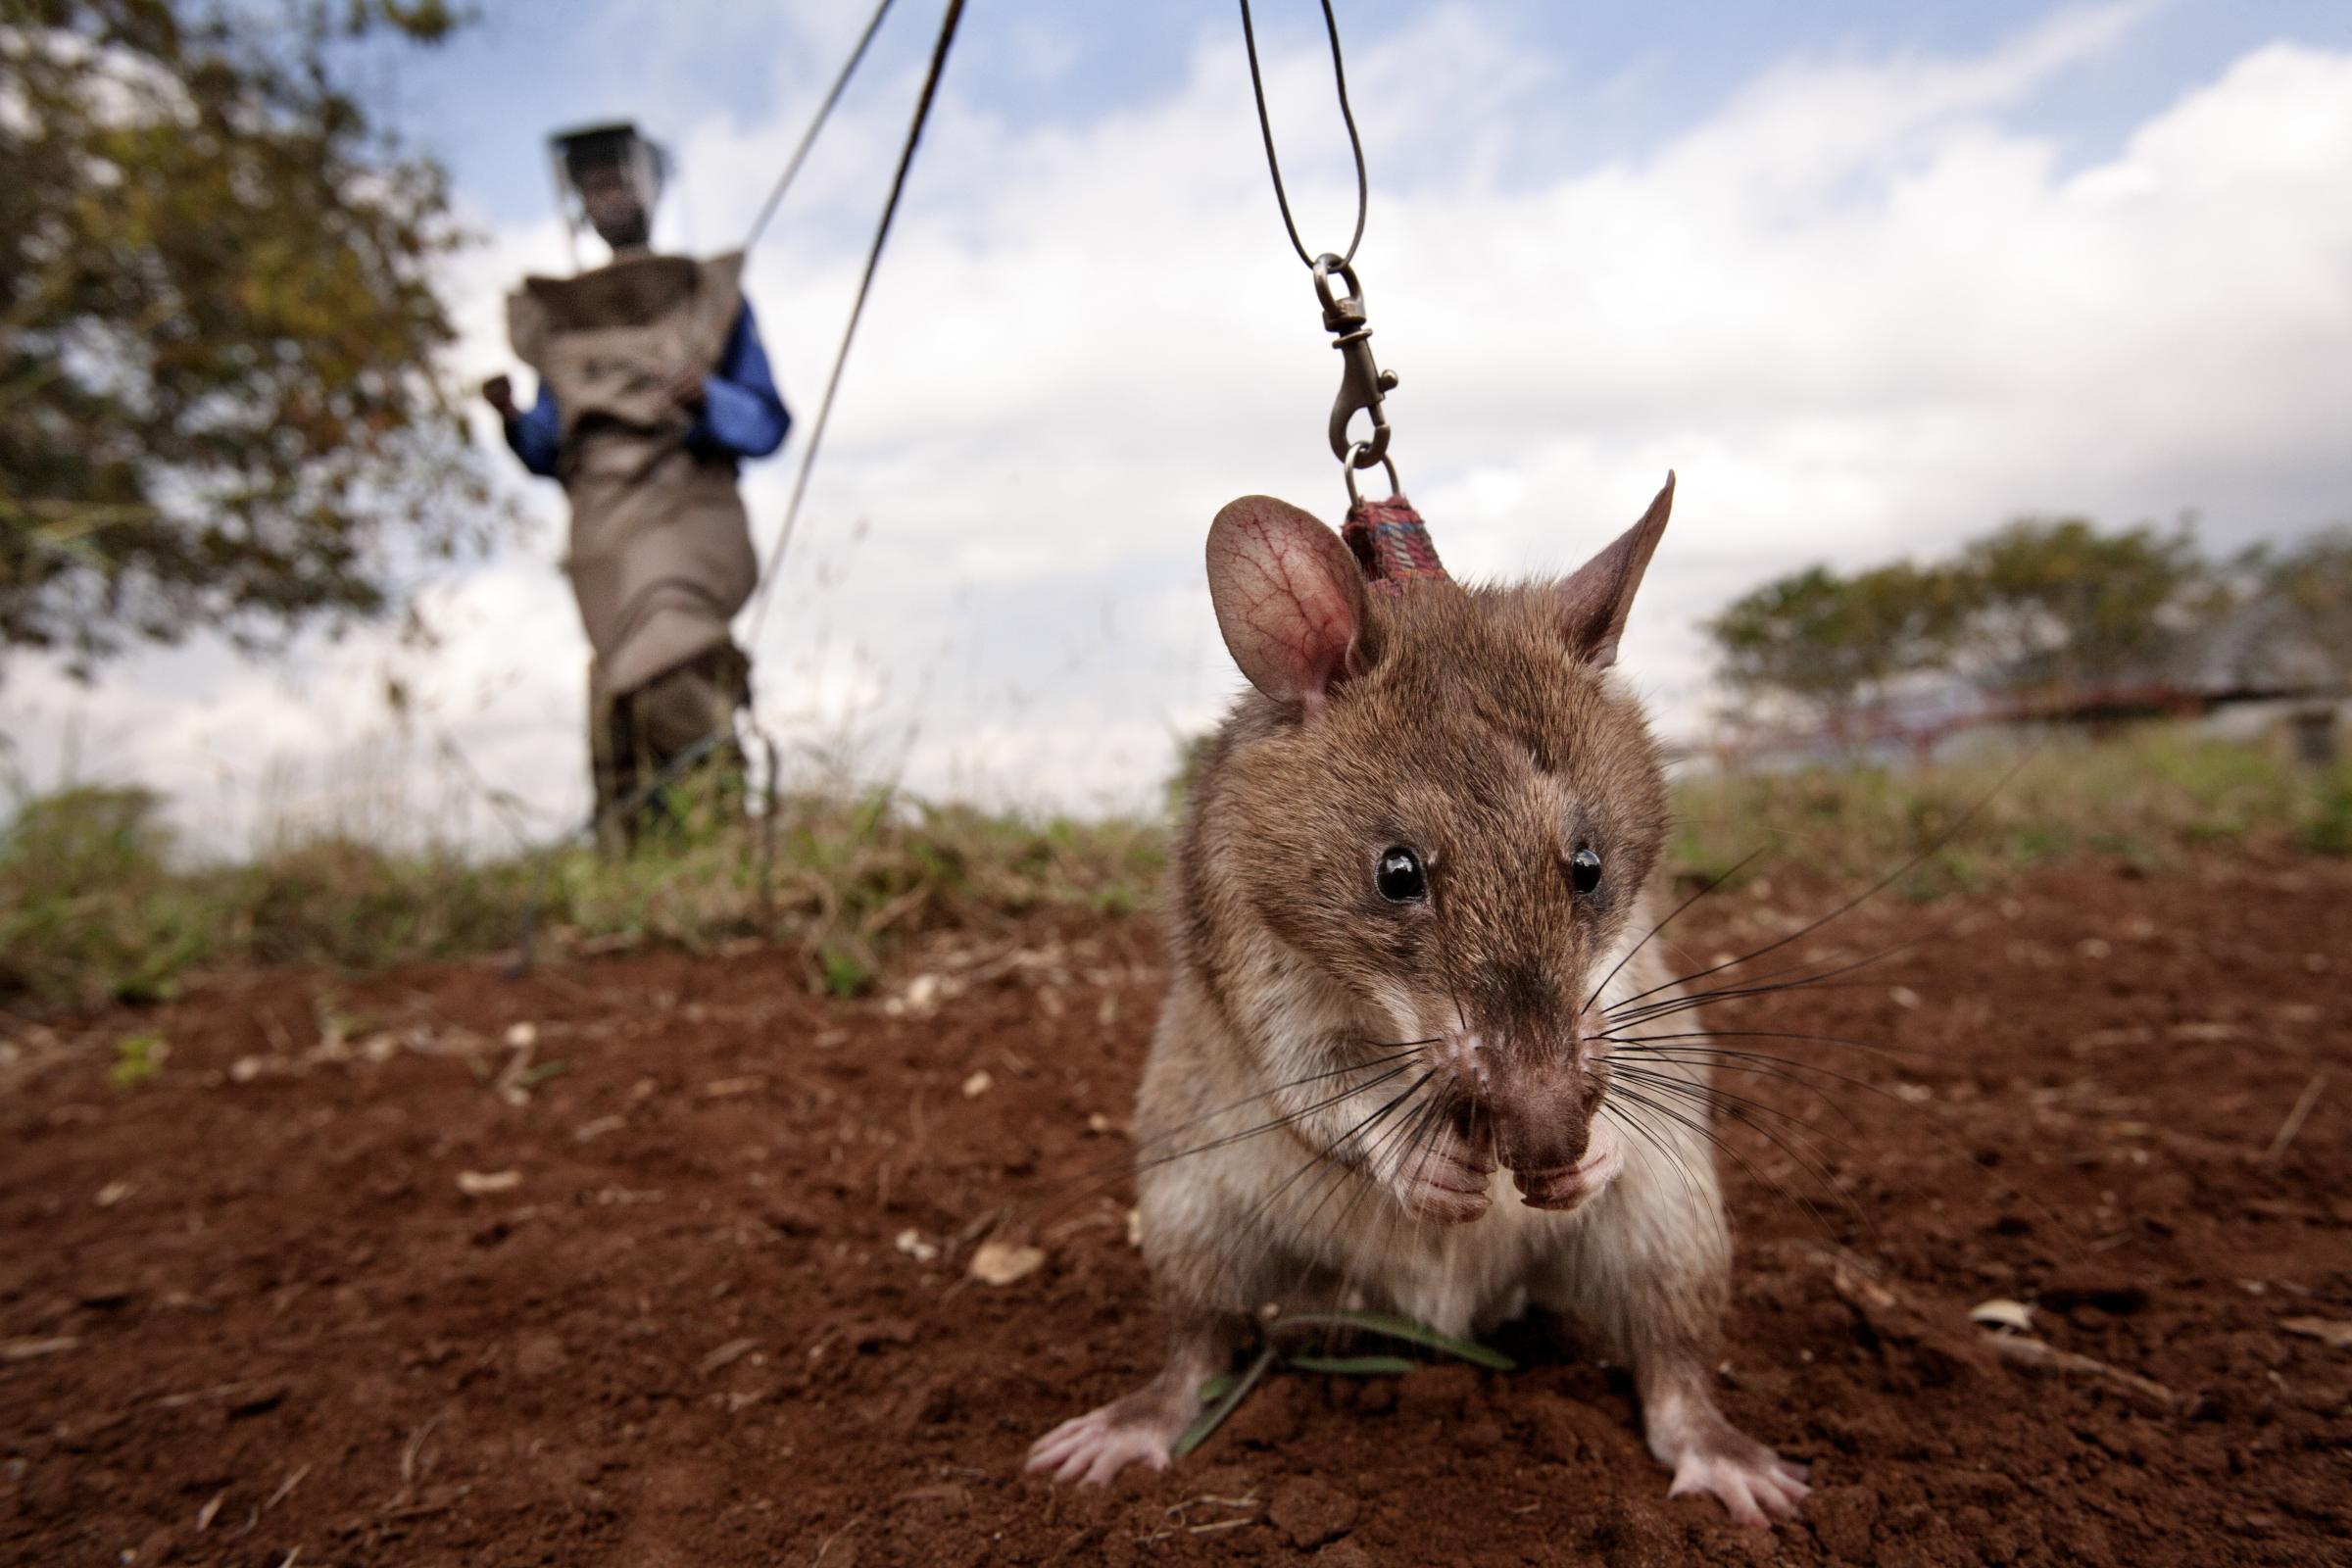 A trainer in a protective suit holds a HeroRAT on a leash as it searches for mines on June 20, 2014 in Morogoro, Tanzania. . The distance created between the trainer and the rat saves human lives and significantly curtails the risks to the human mine clearers.